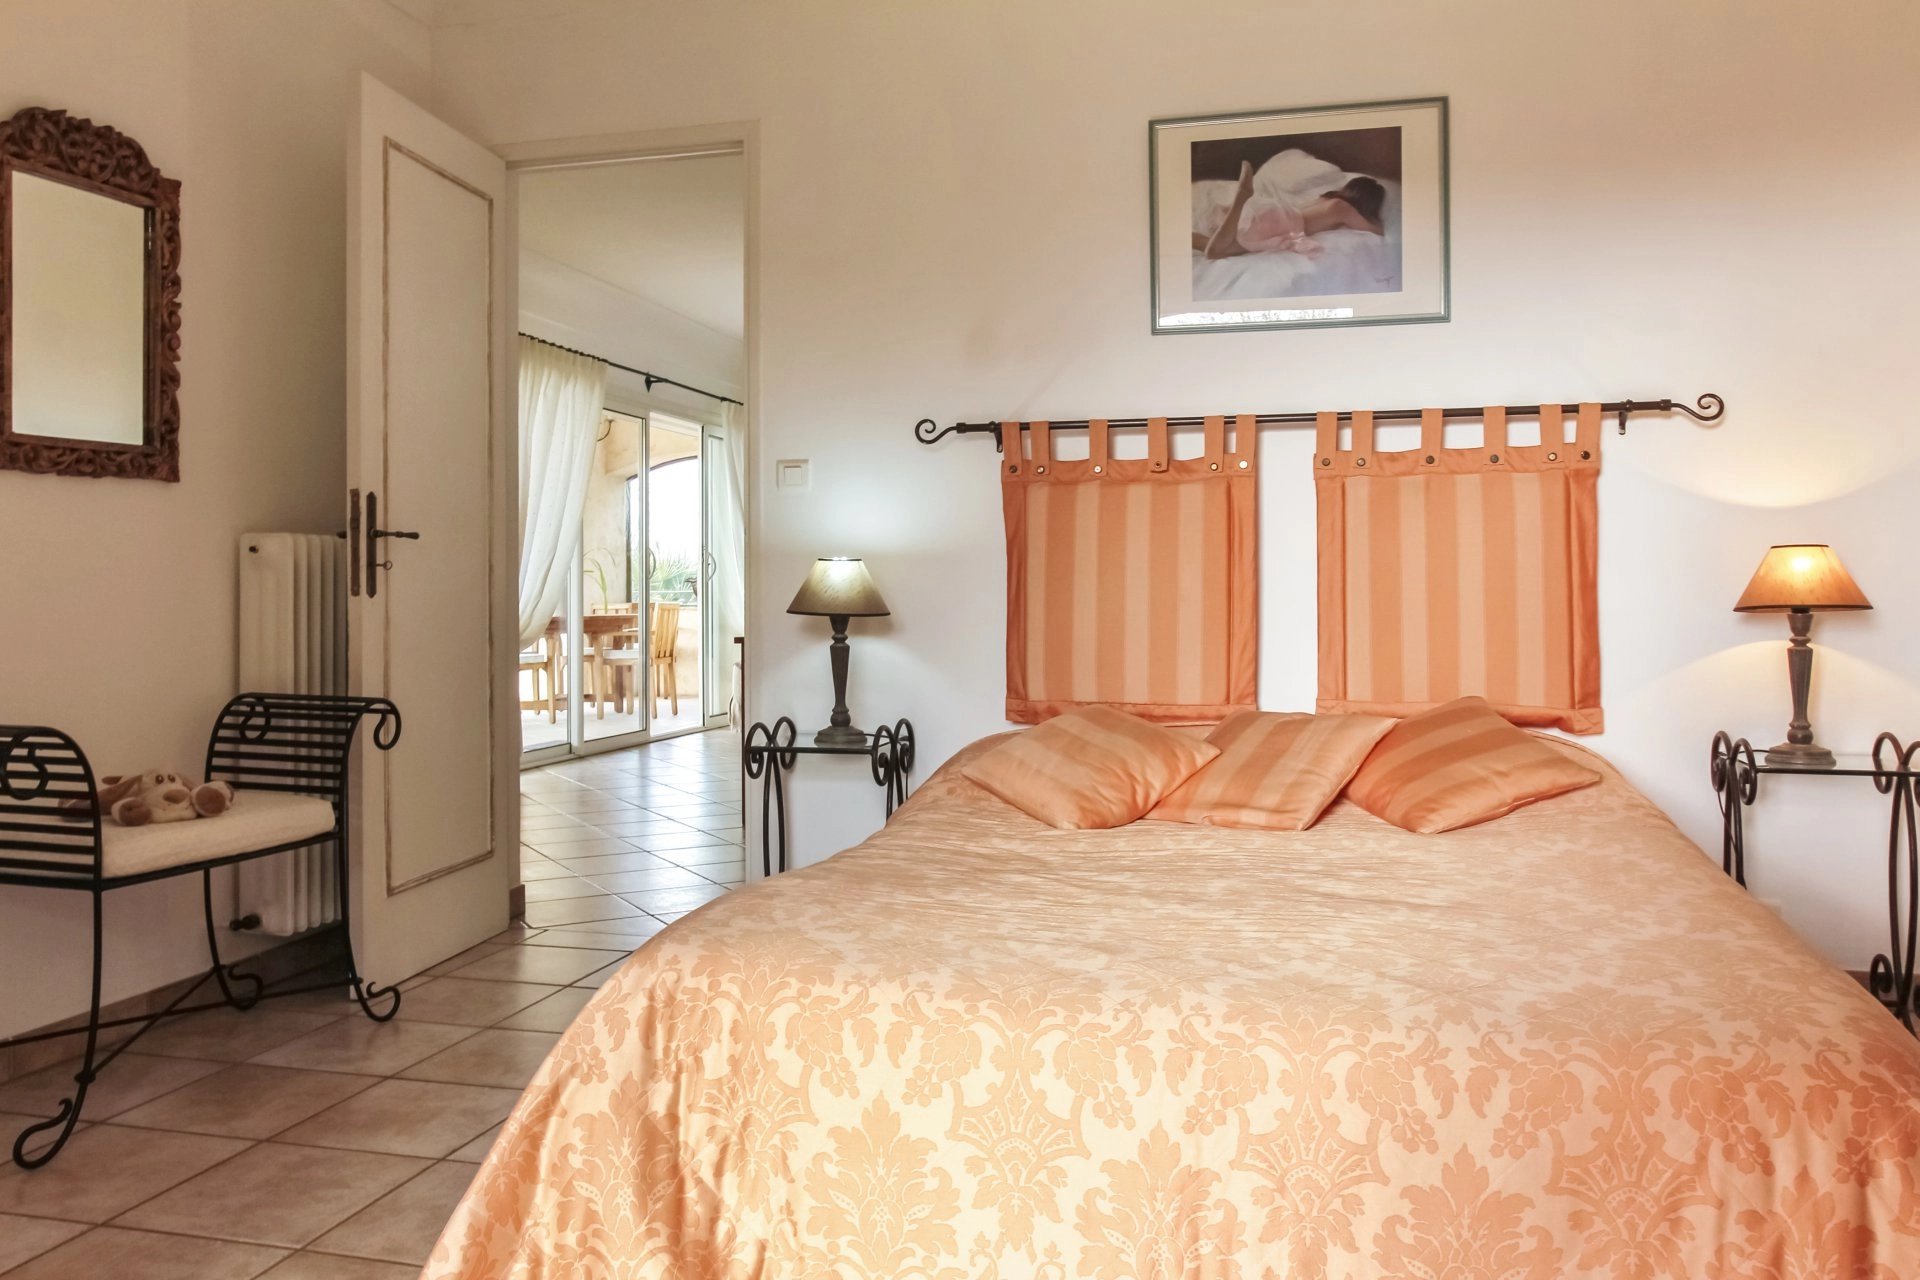 Provencal villa at only 250 meteres from the historical center of Valbonne Village.